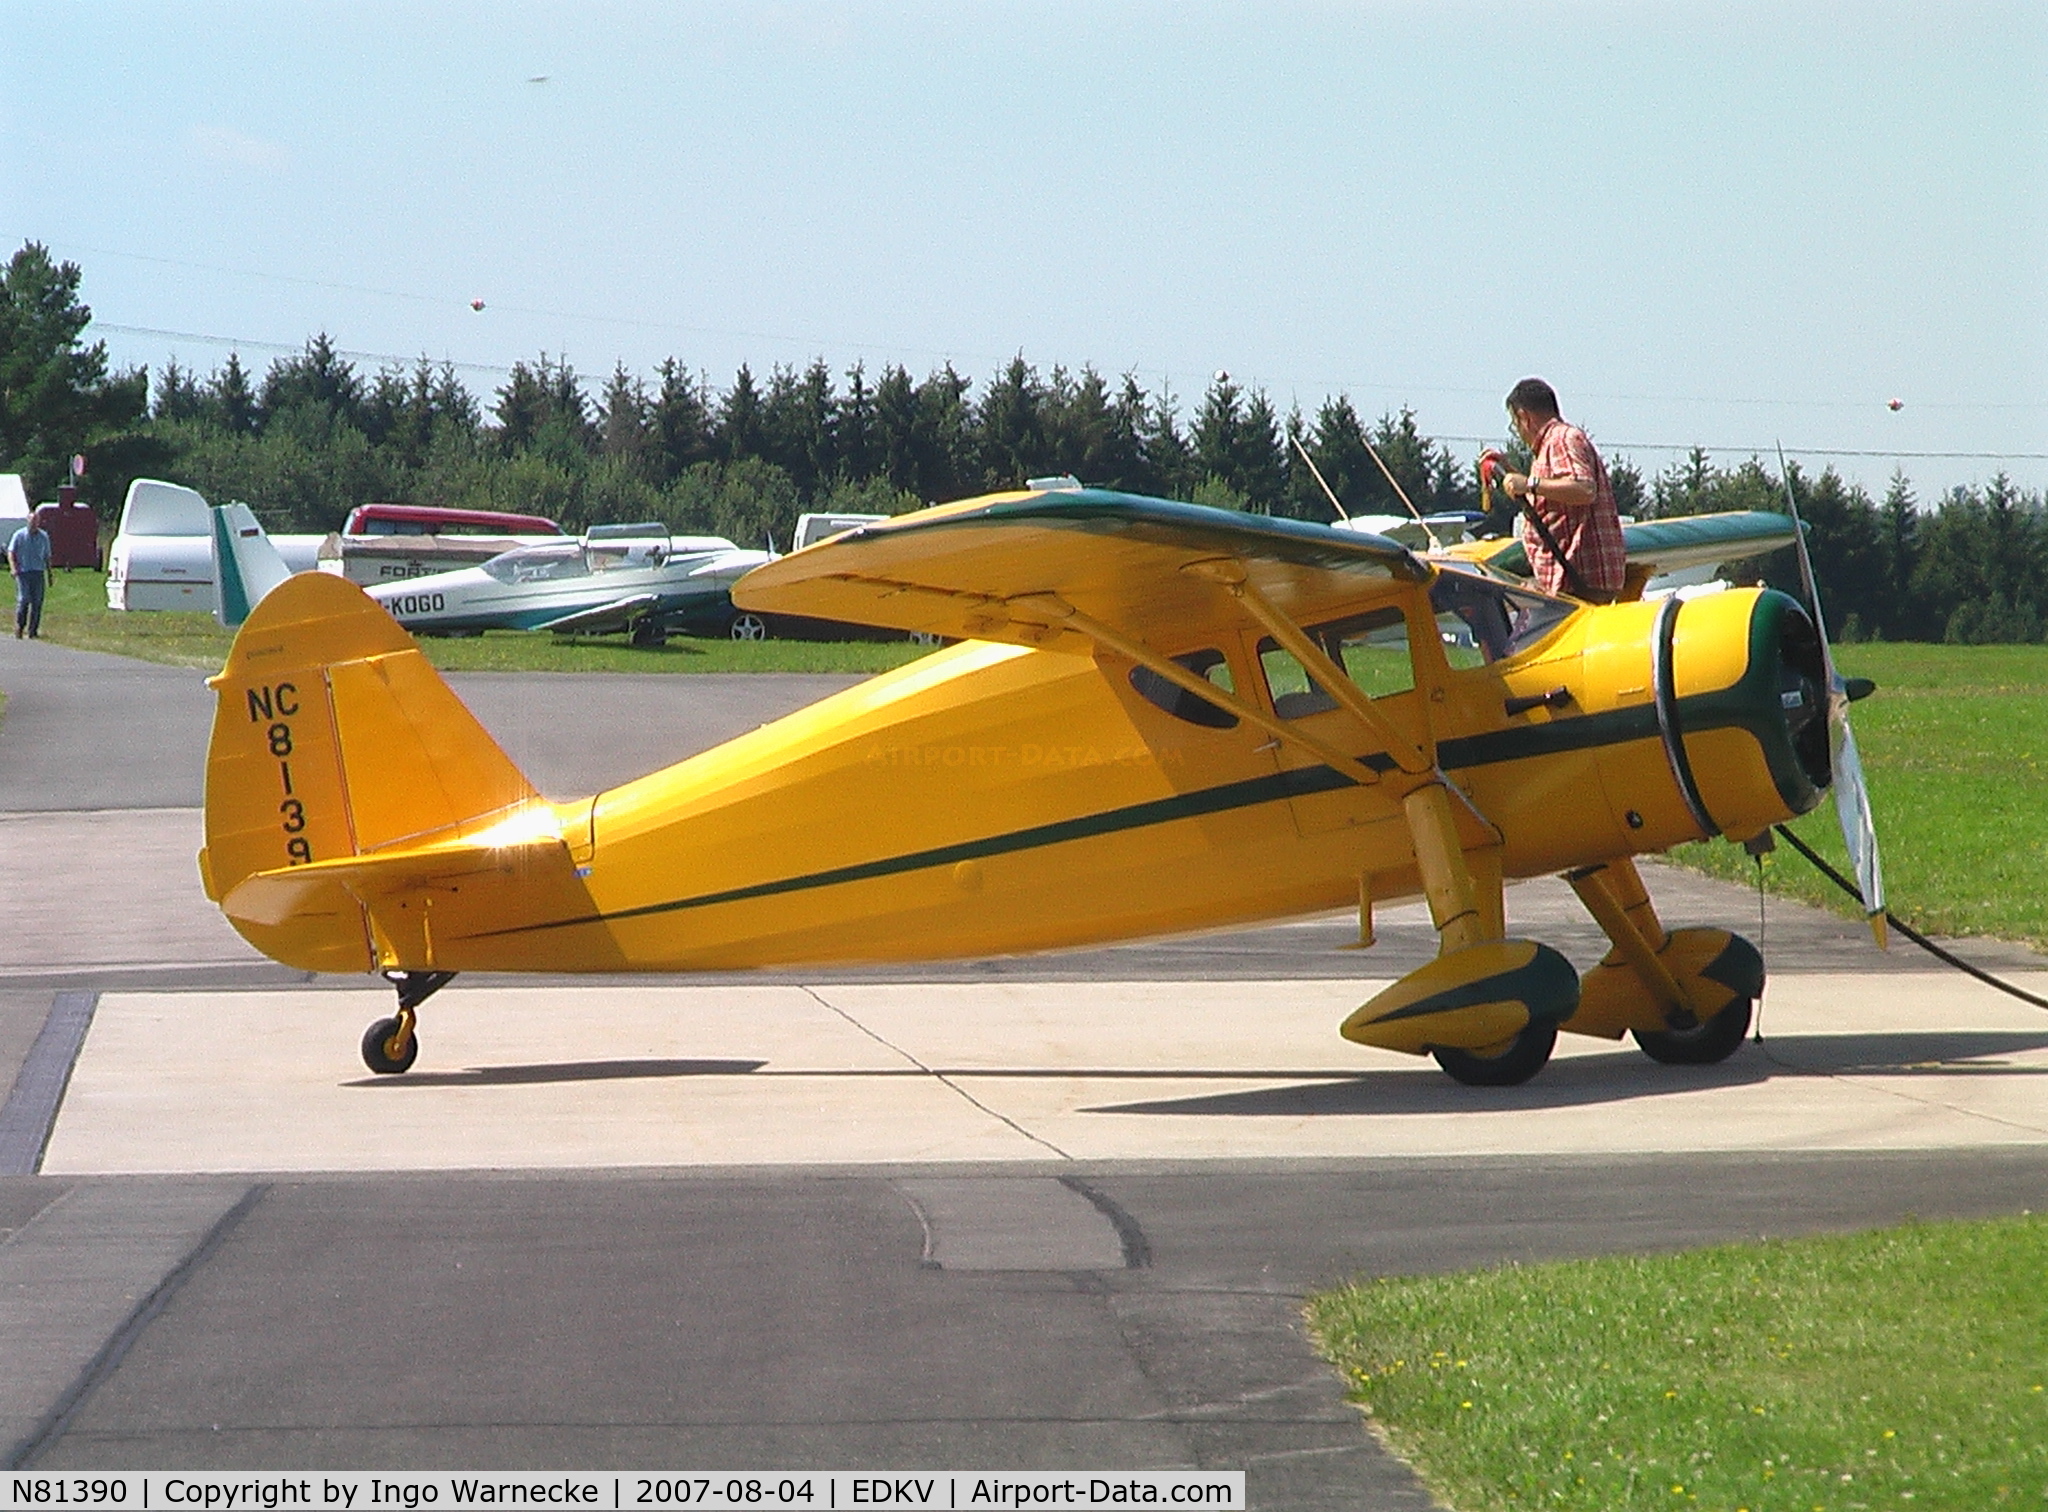 N81390, 1946 Fairchild 24W-46 C/N W46290, Fairchild 24W-46 just arrived in Germany at Dahlemer-Binz airfield